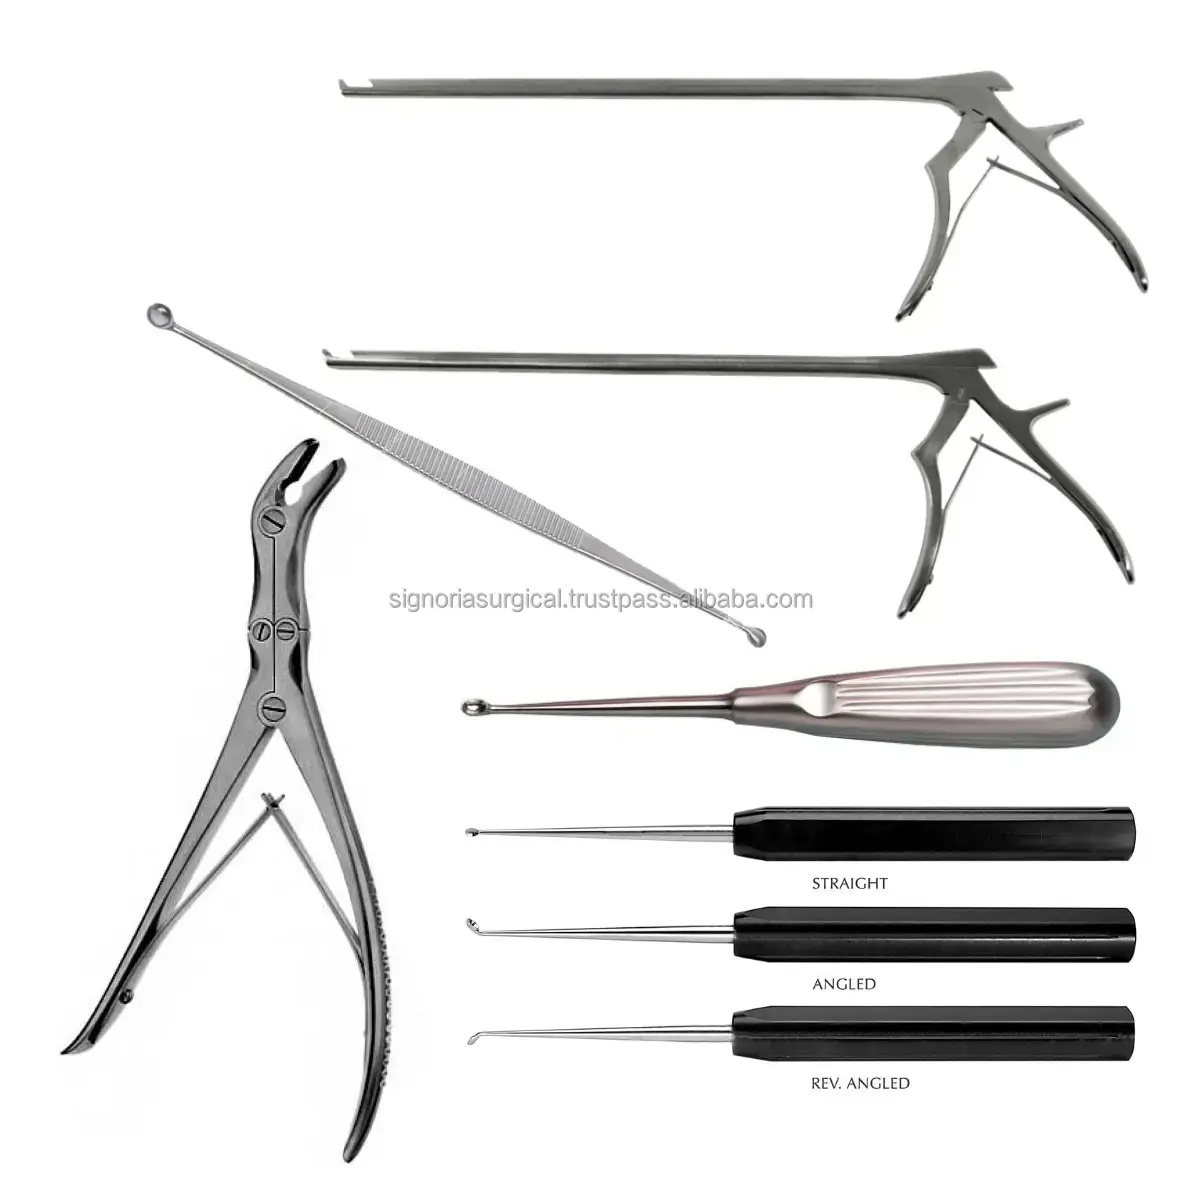 KerrisonパンチとRongeur Bone Curettes Set Orthopedic Special German Quality CE Certified by signoria Surgical